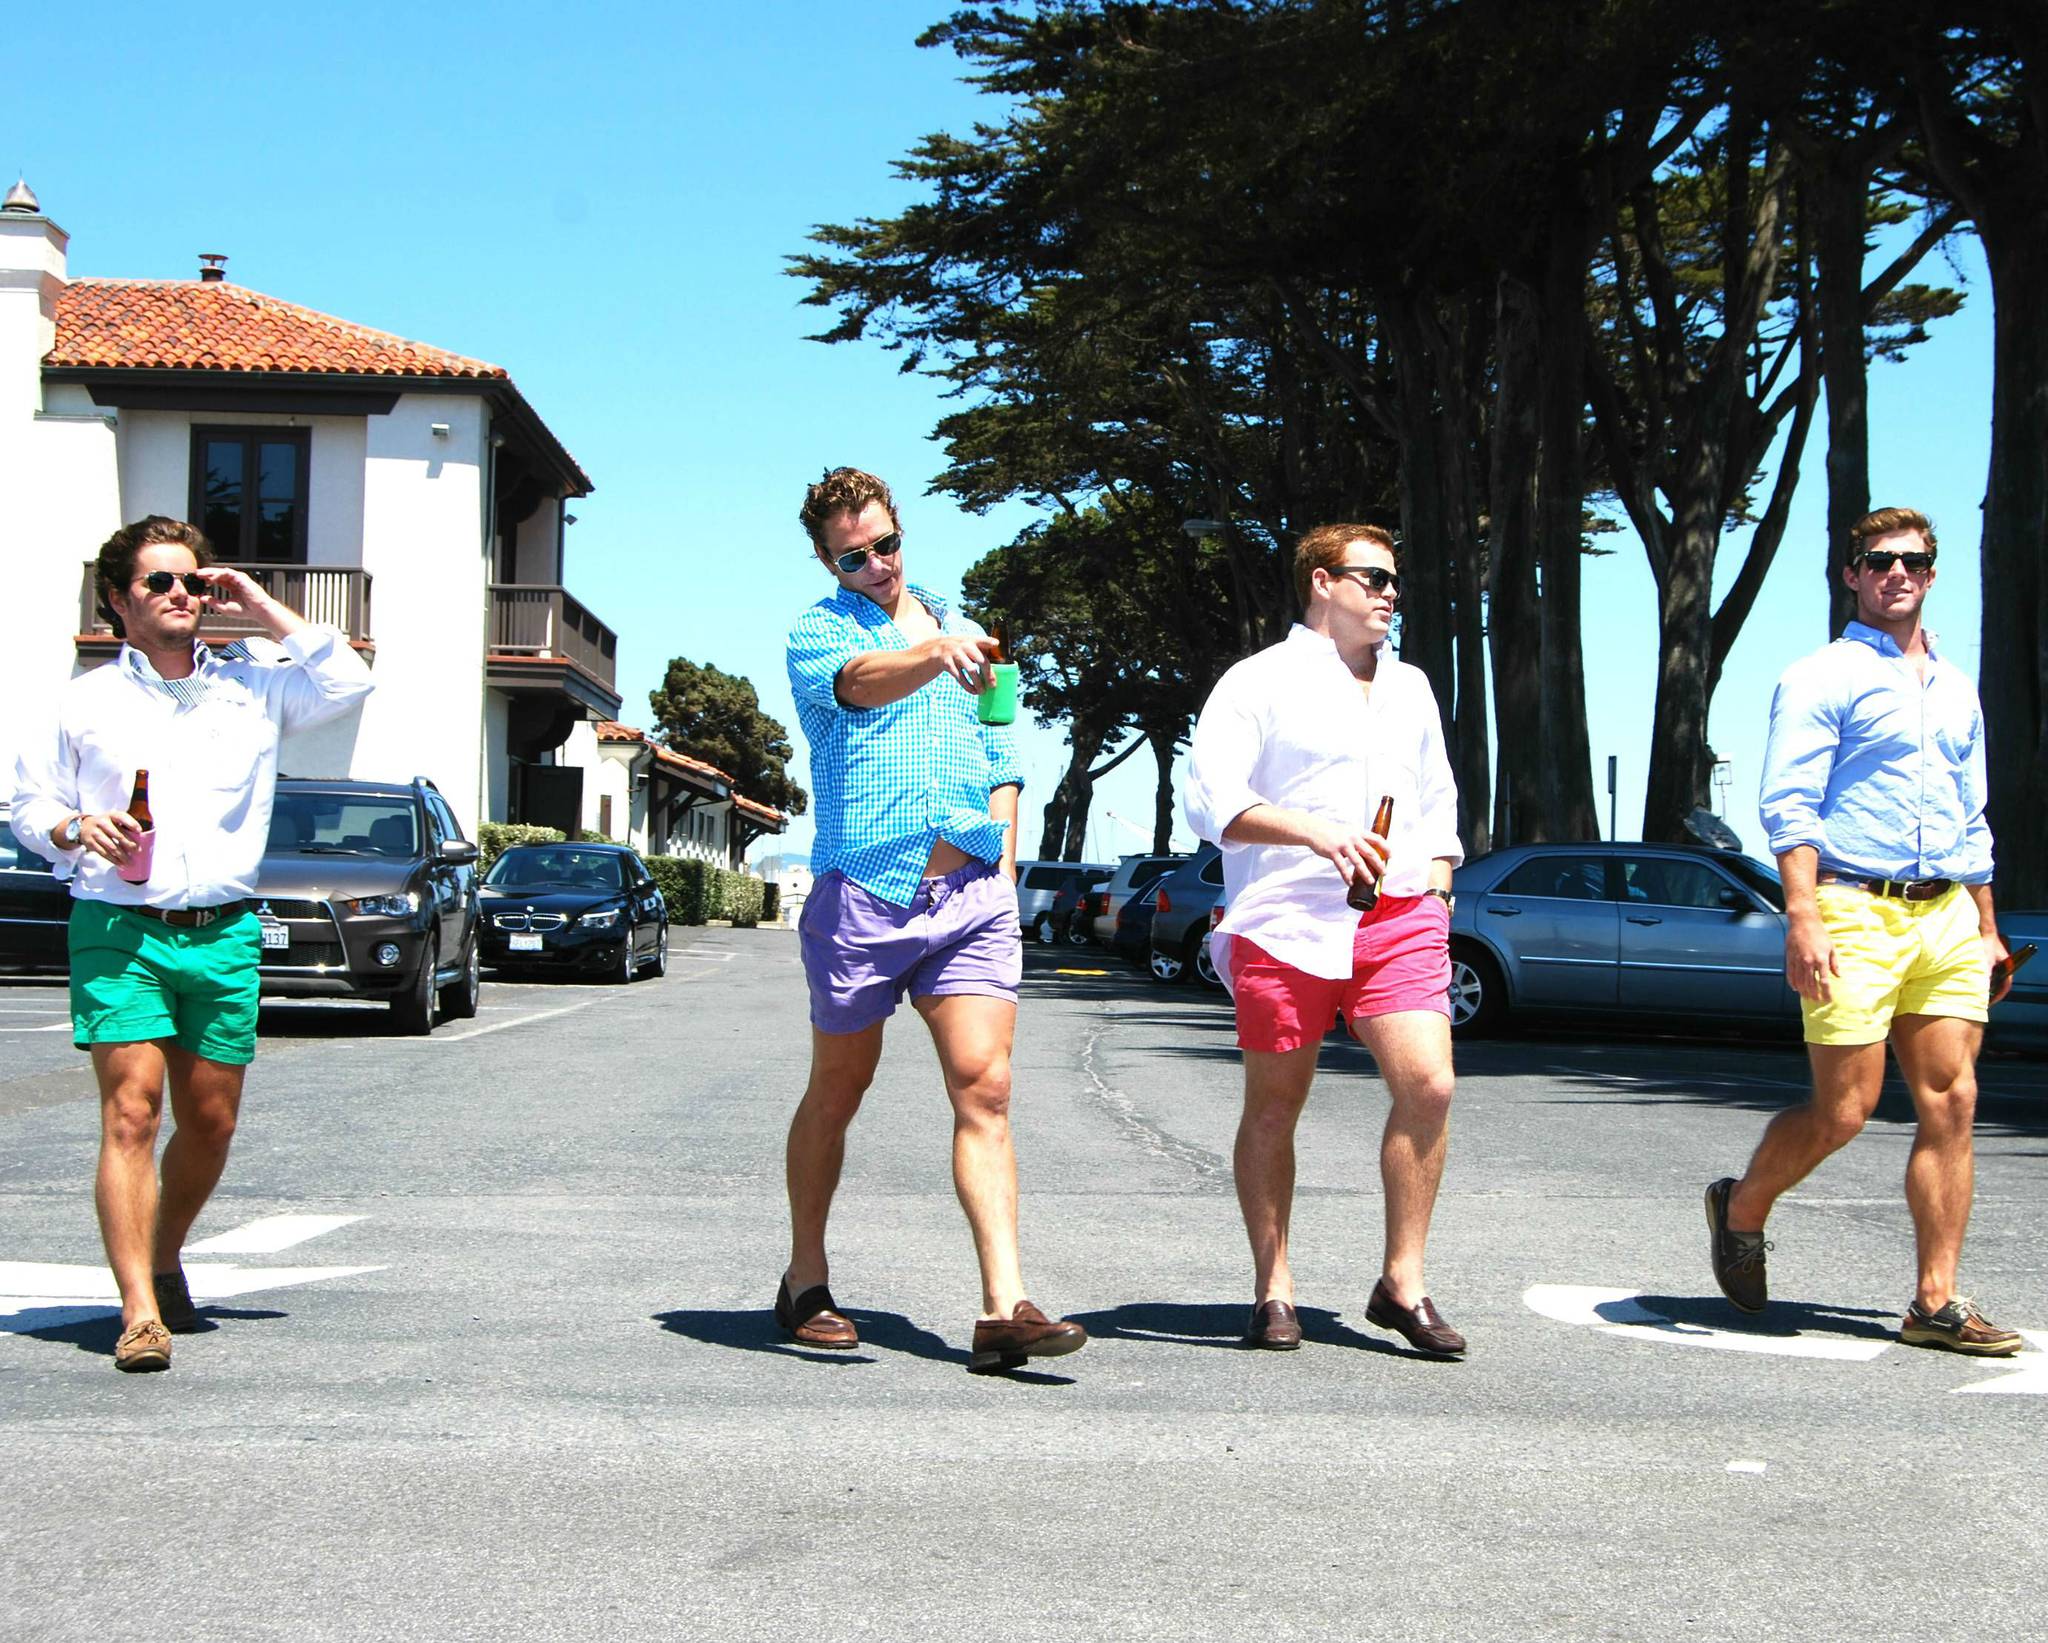 Chubbies: a start-up brand for the neo frat boy